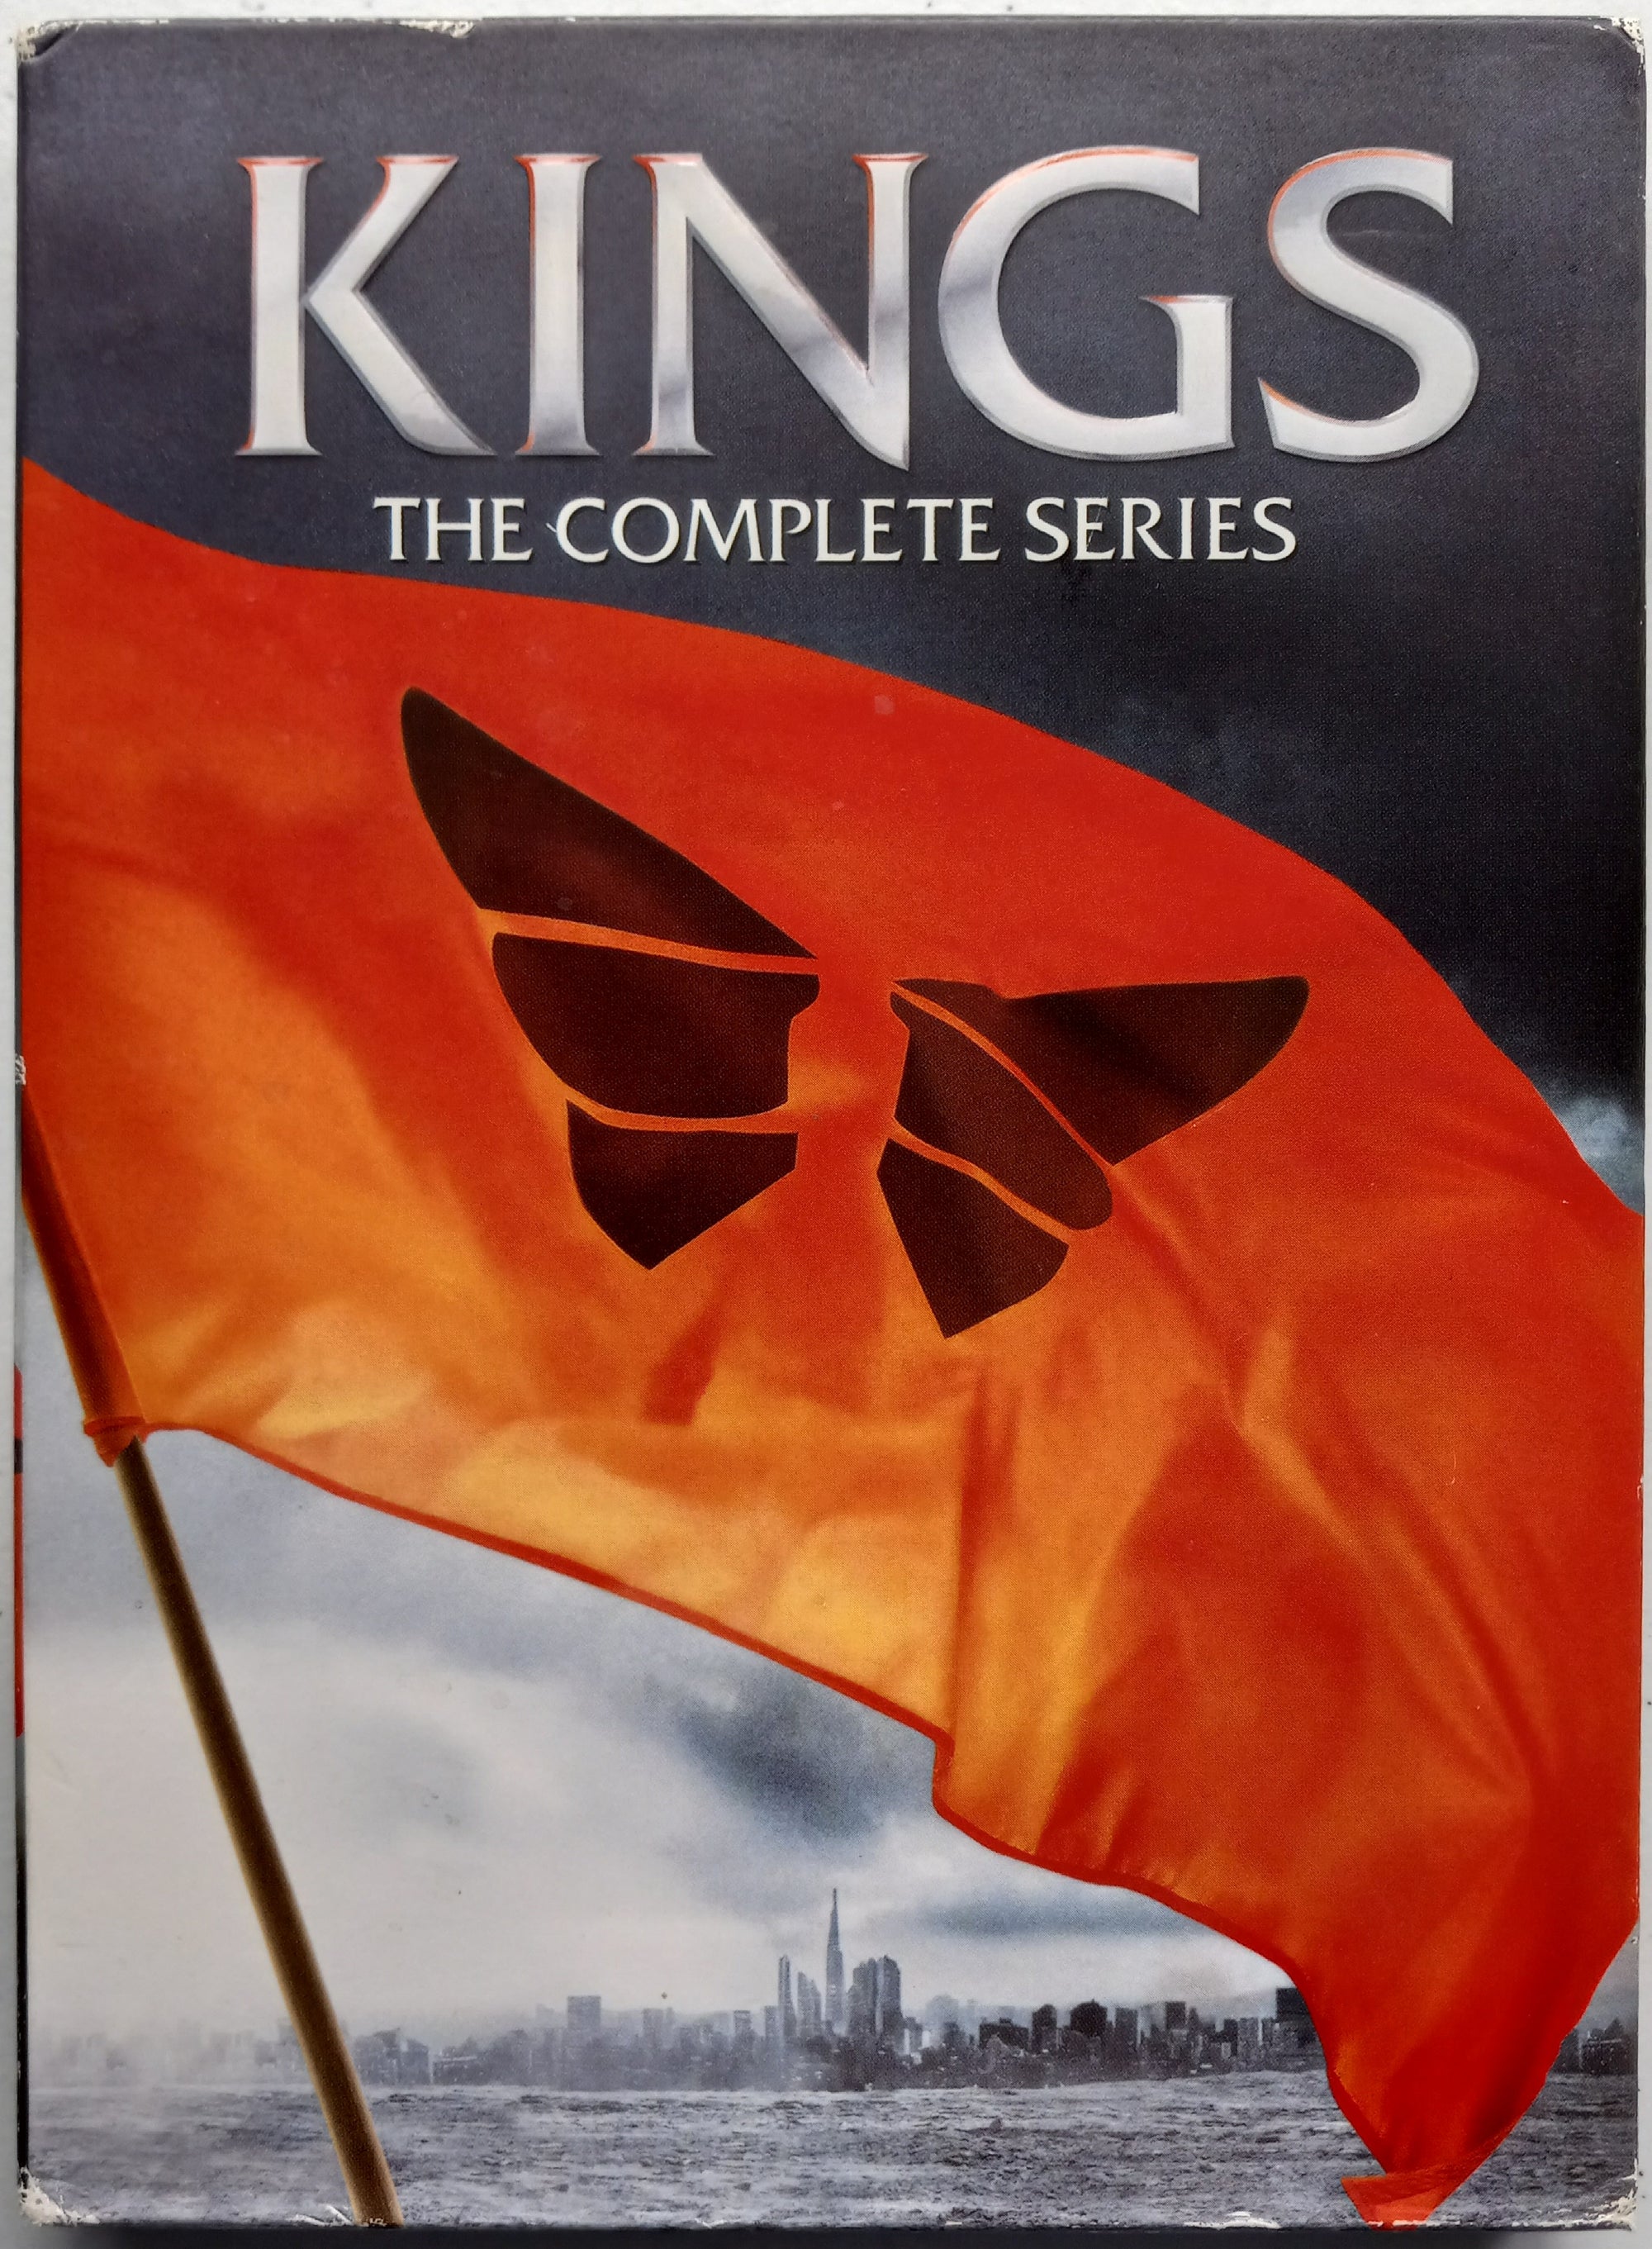 KINGS: THE COMPLETE SERIES - DVD, 2009